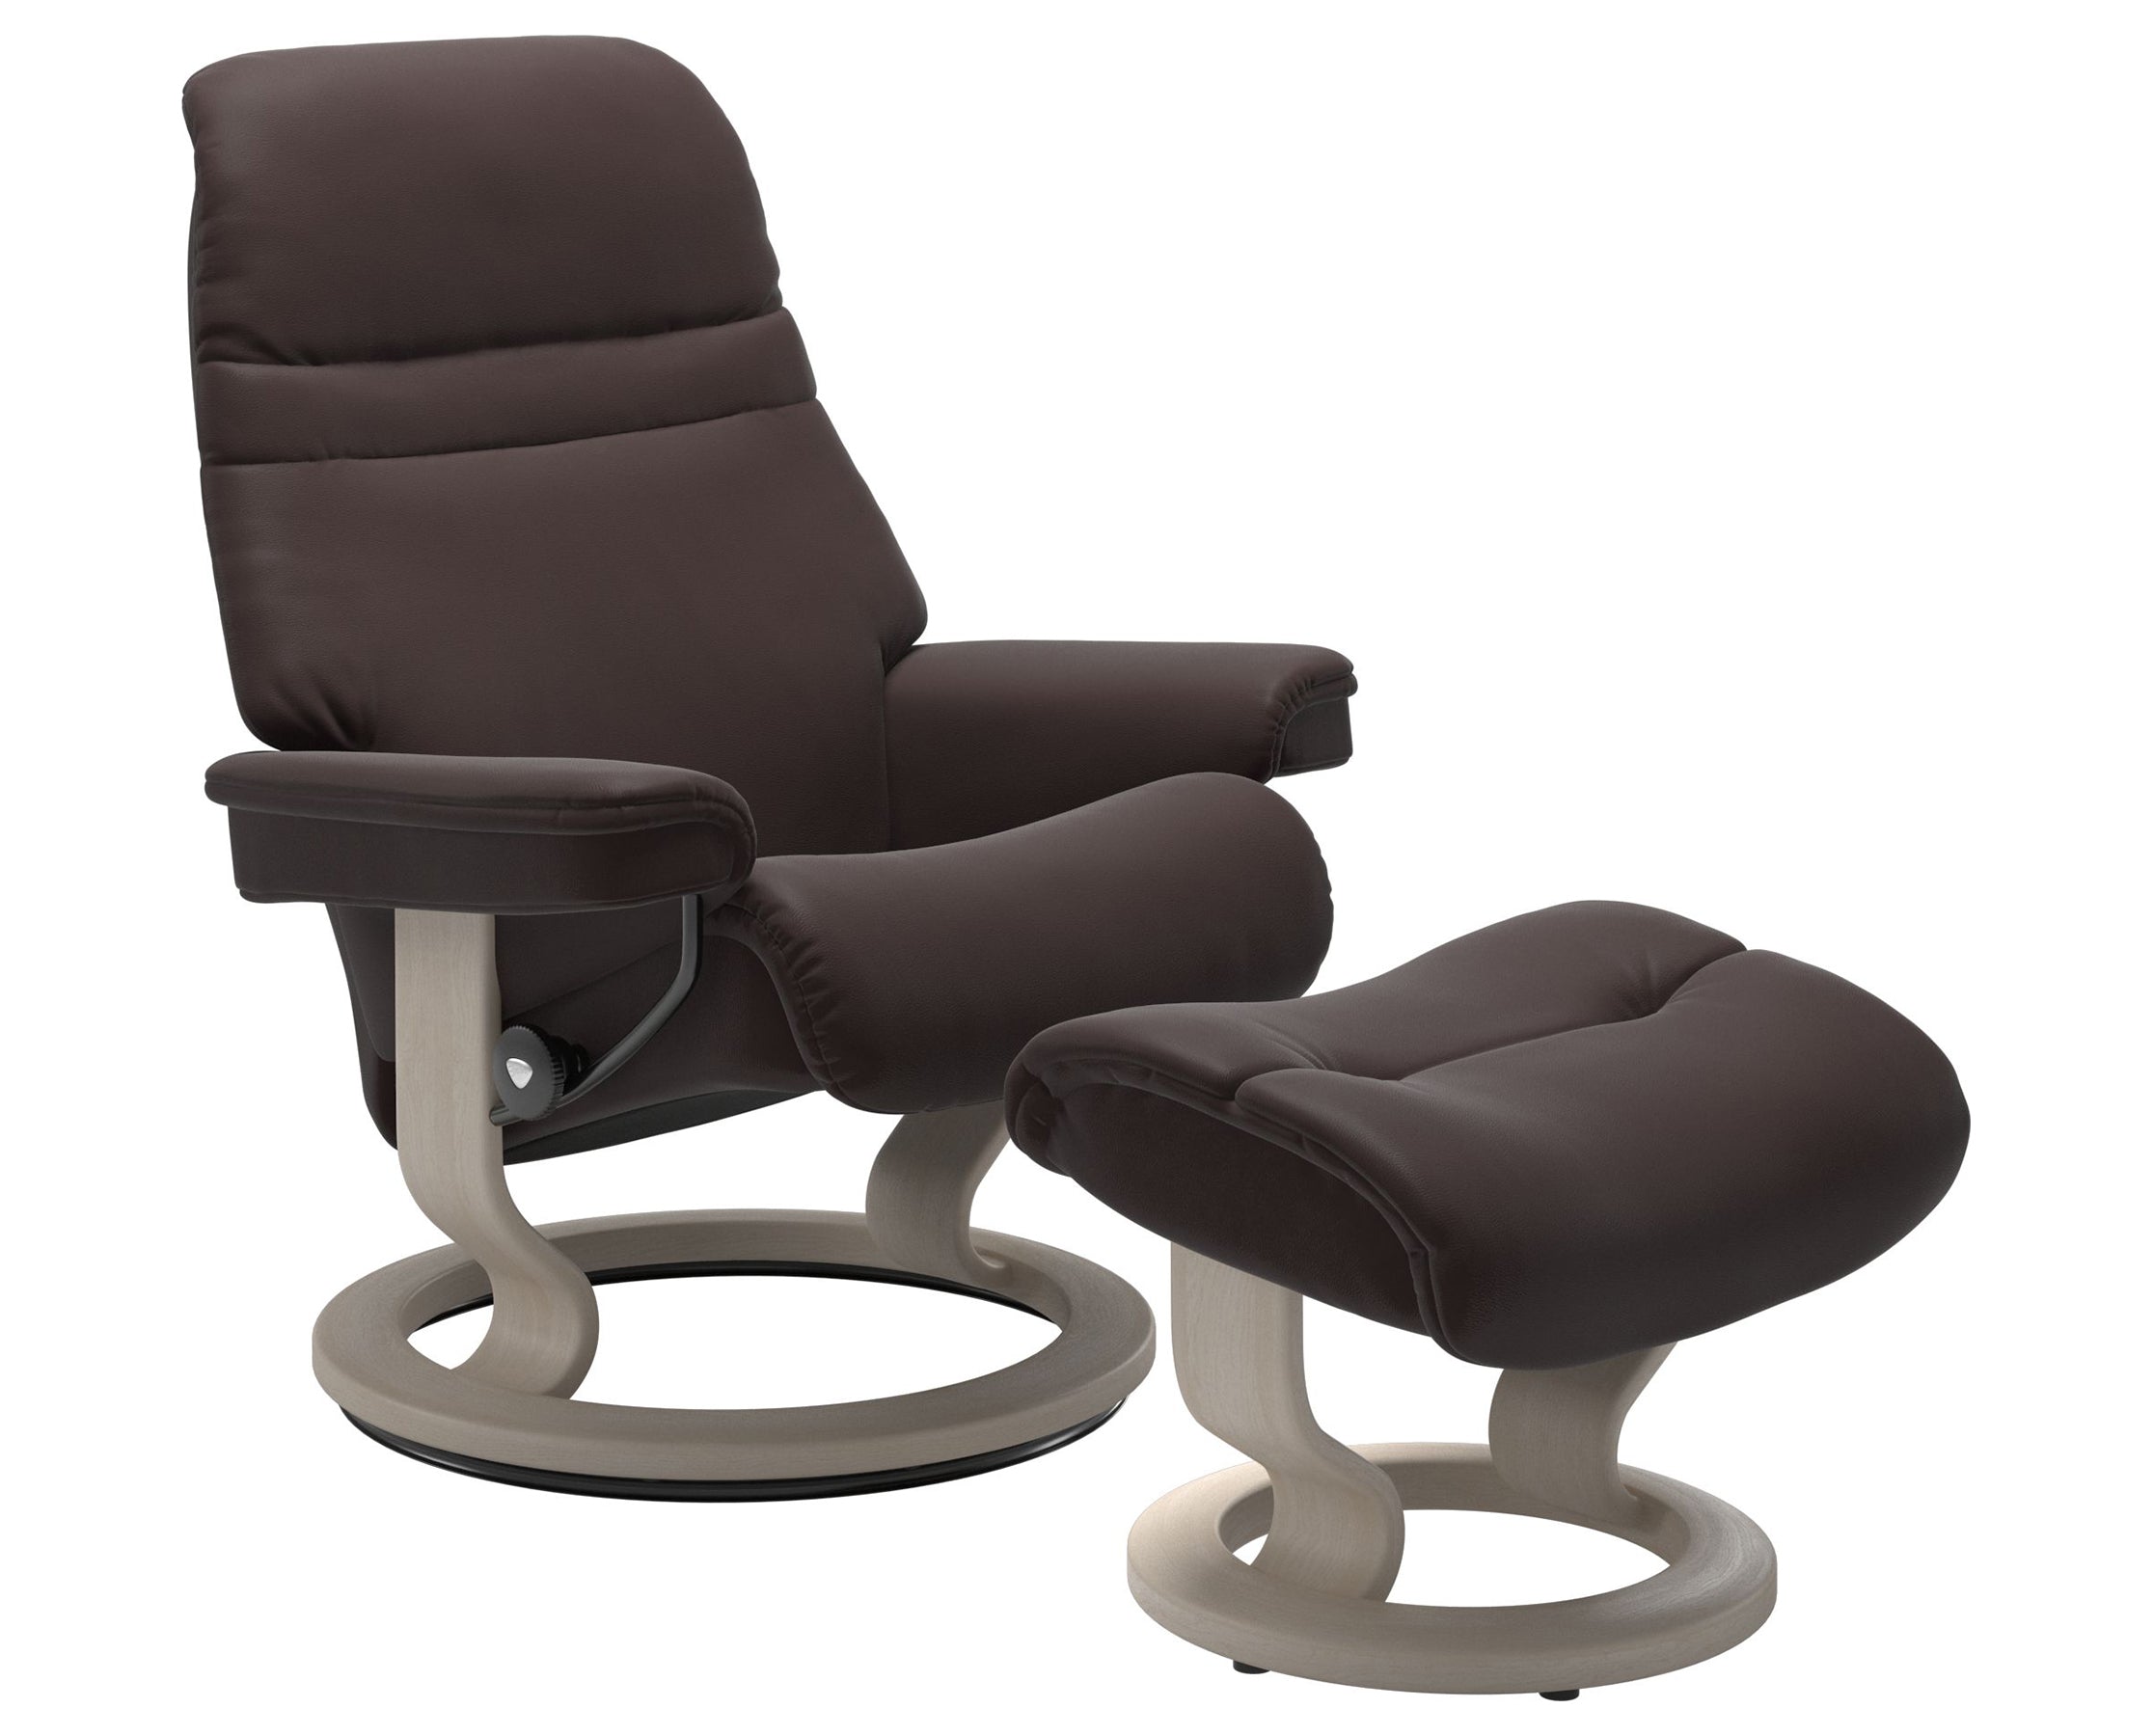 Paloma Leather Chocolate S/M/L and Whitewash Base | Stressless Sunrise Classic Recliner | Valley Ridge Furniture